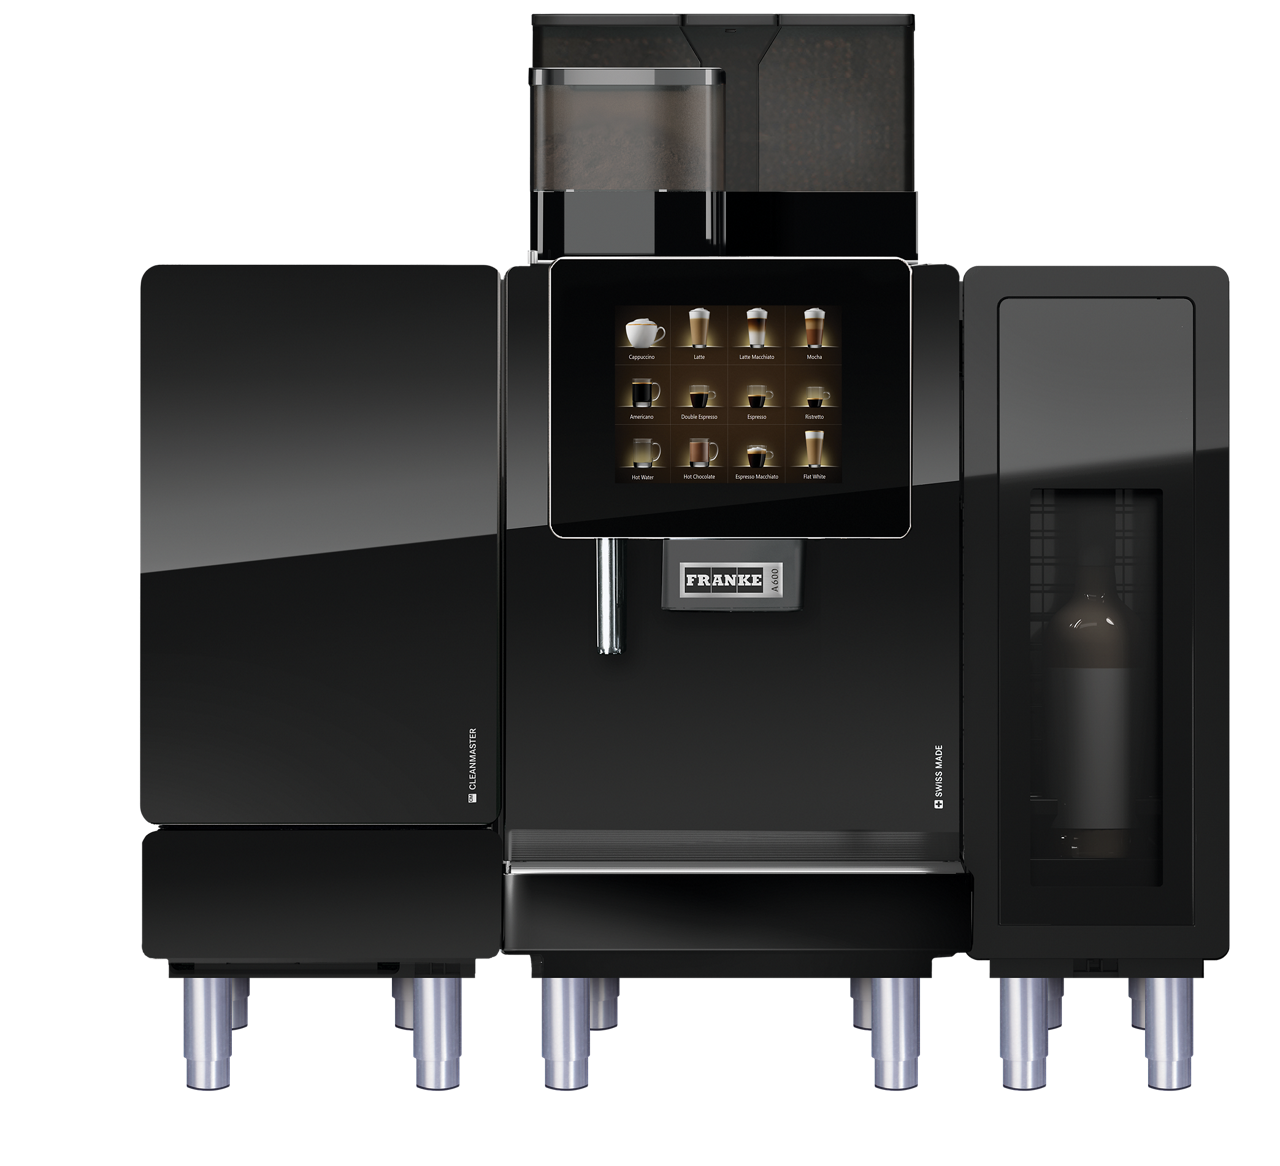 Franke Coffee Systems A600 fully automatic coffee machine